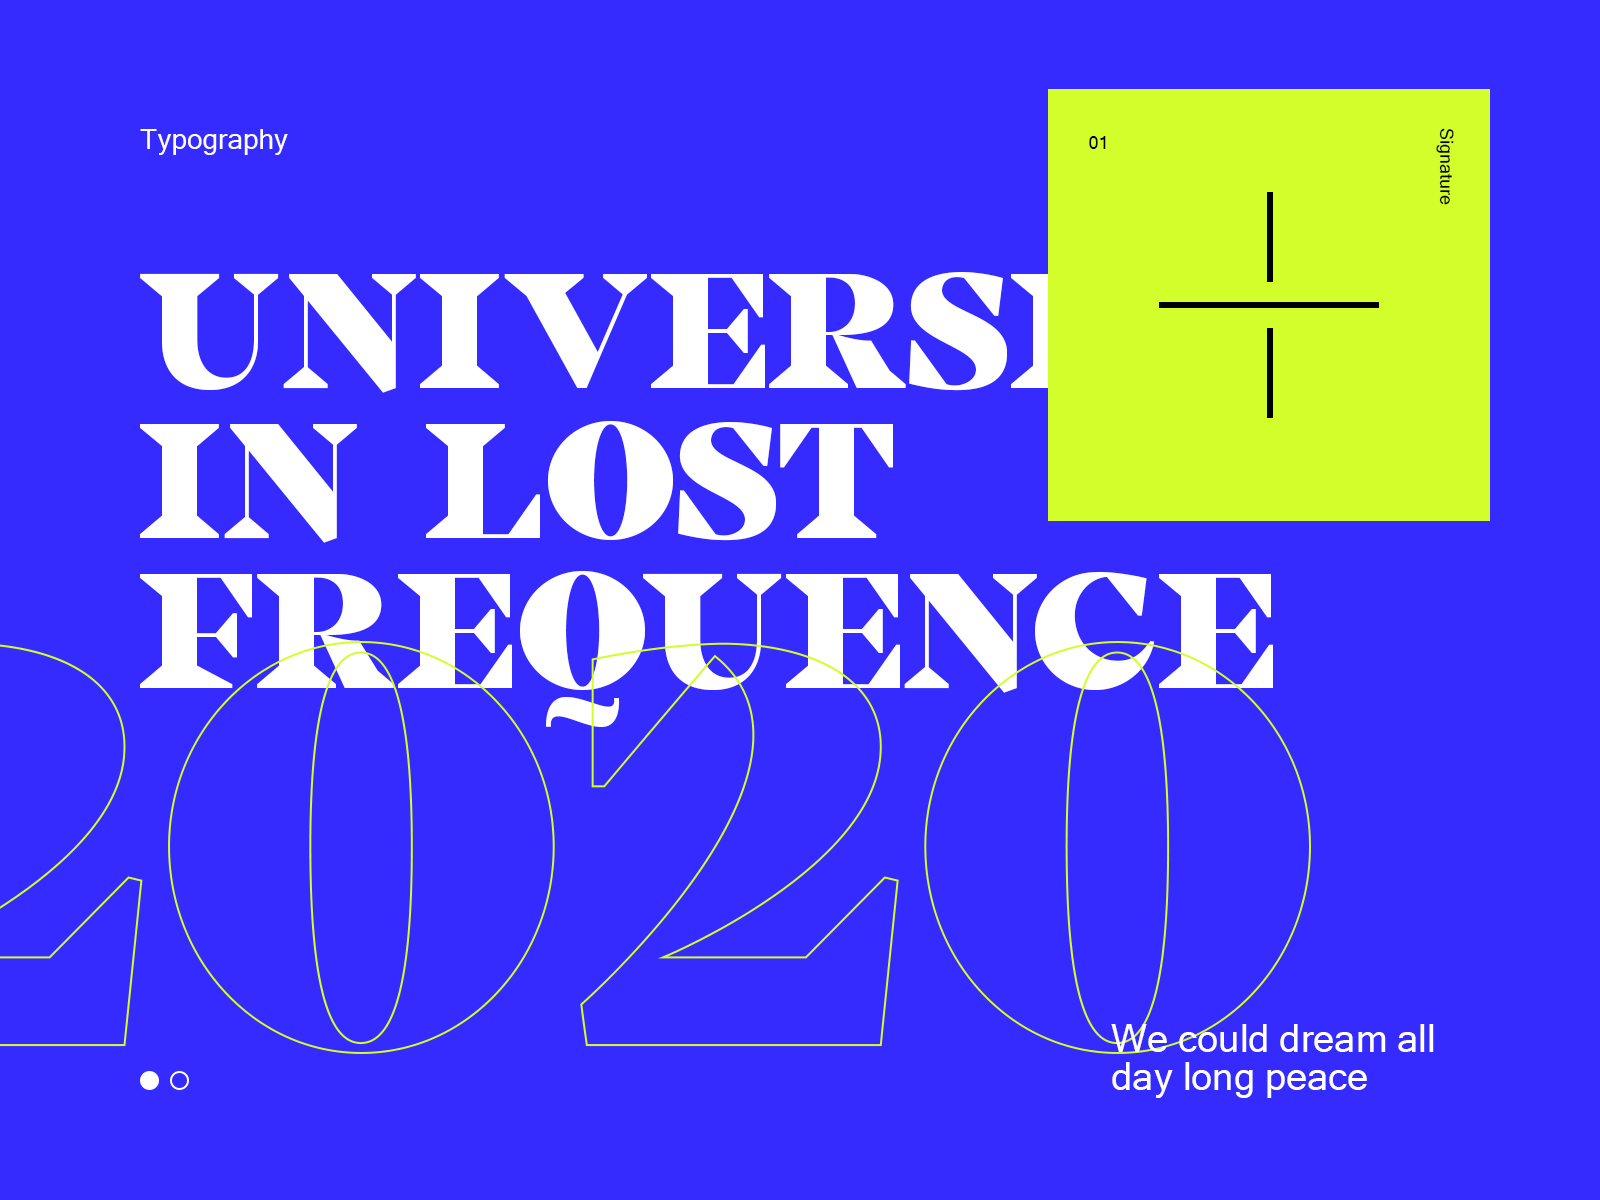 Universe in Lost Frequence